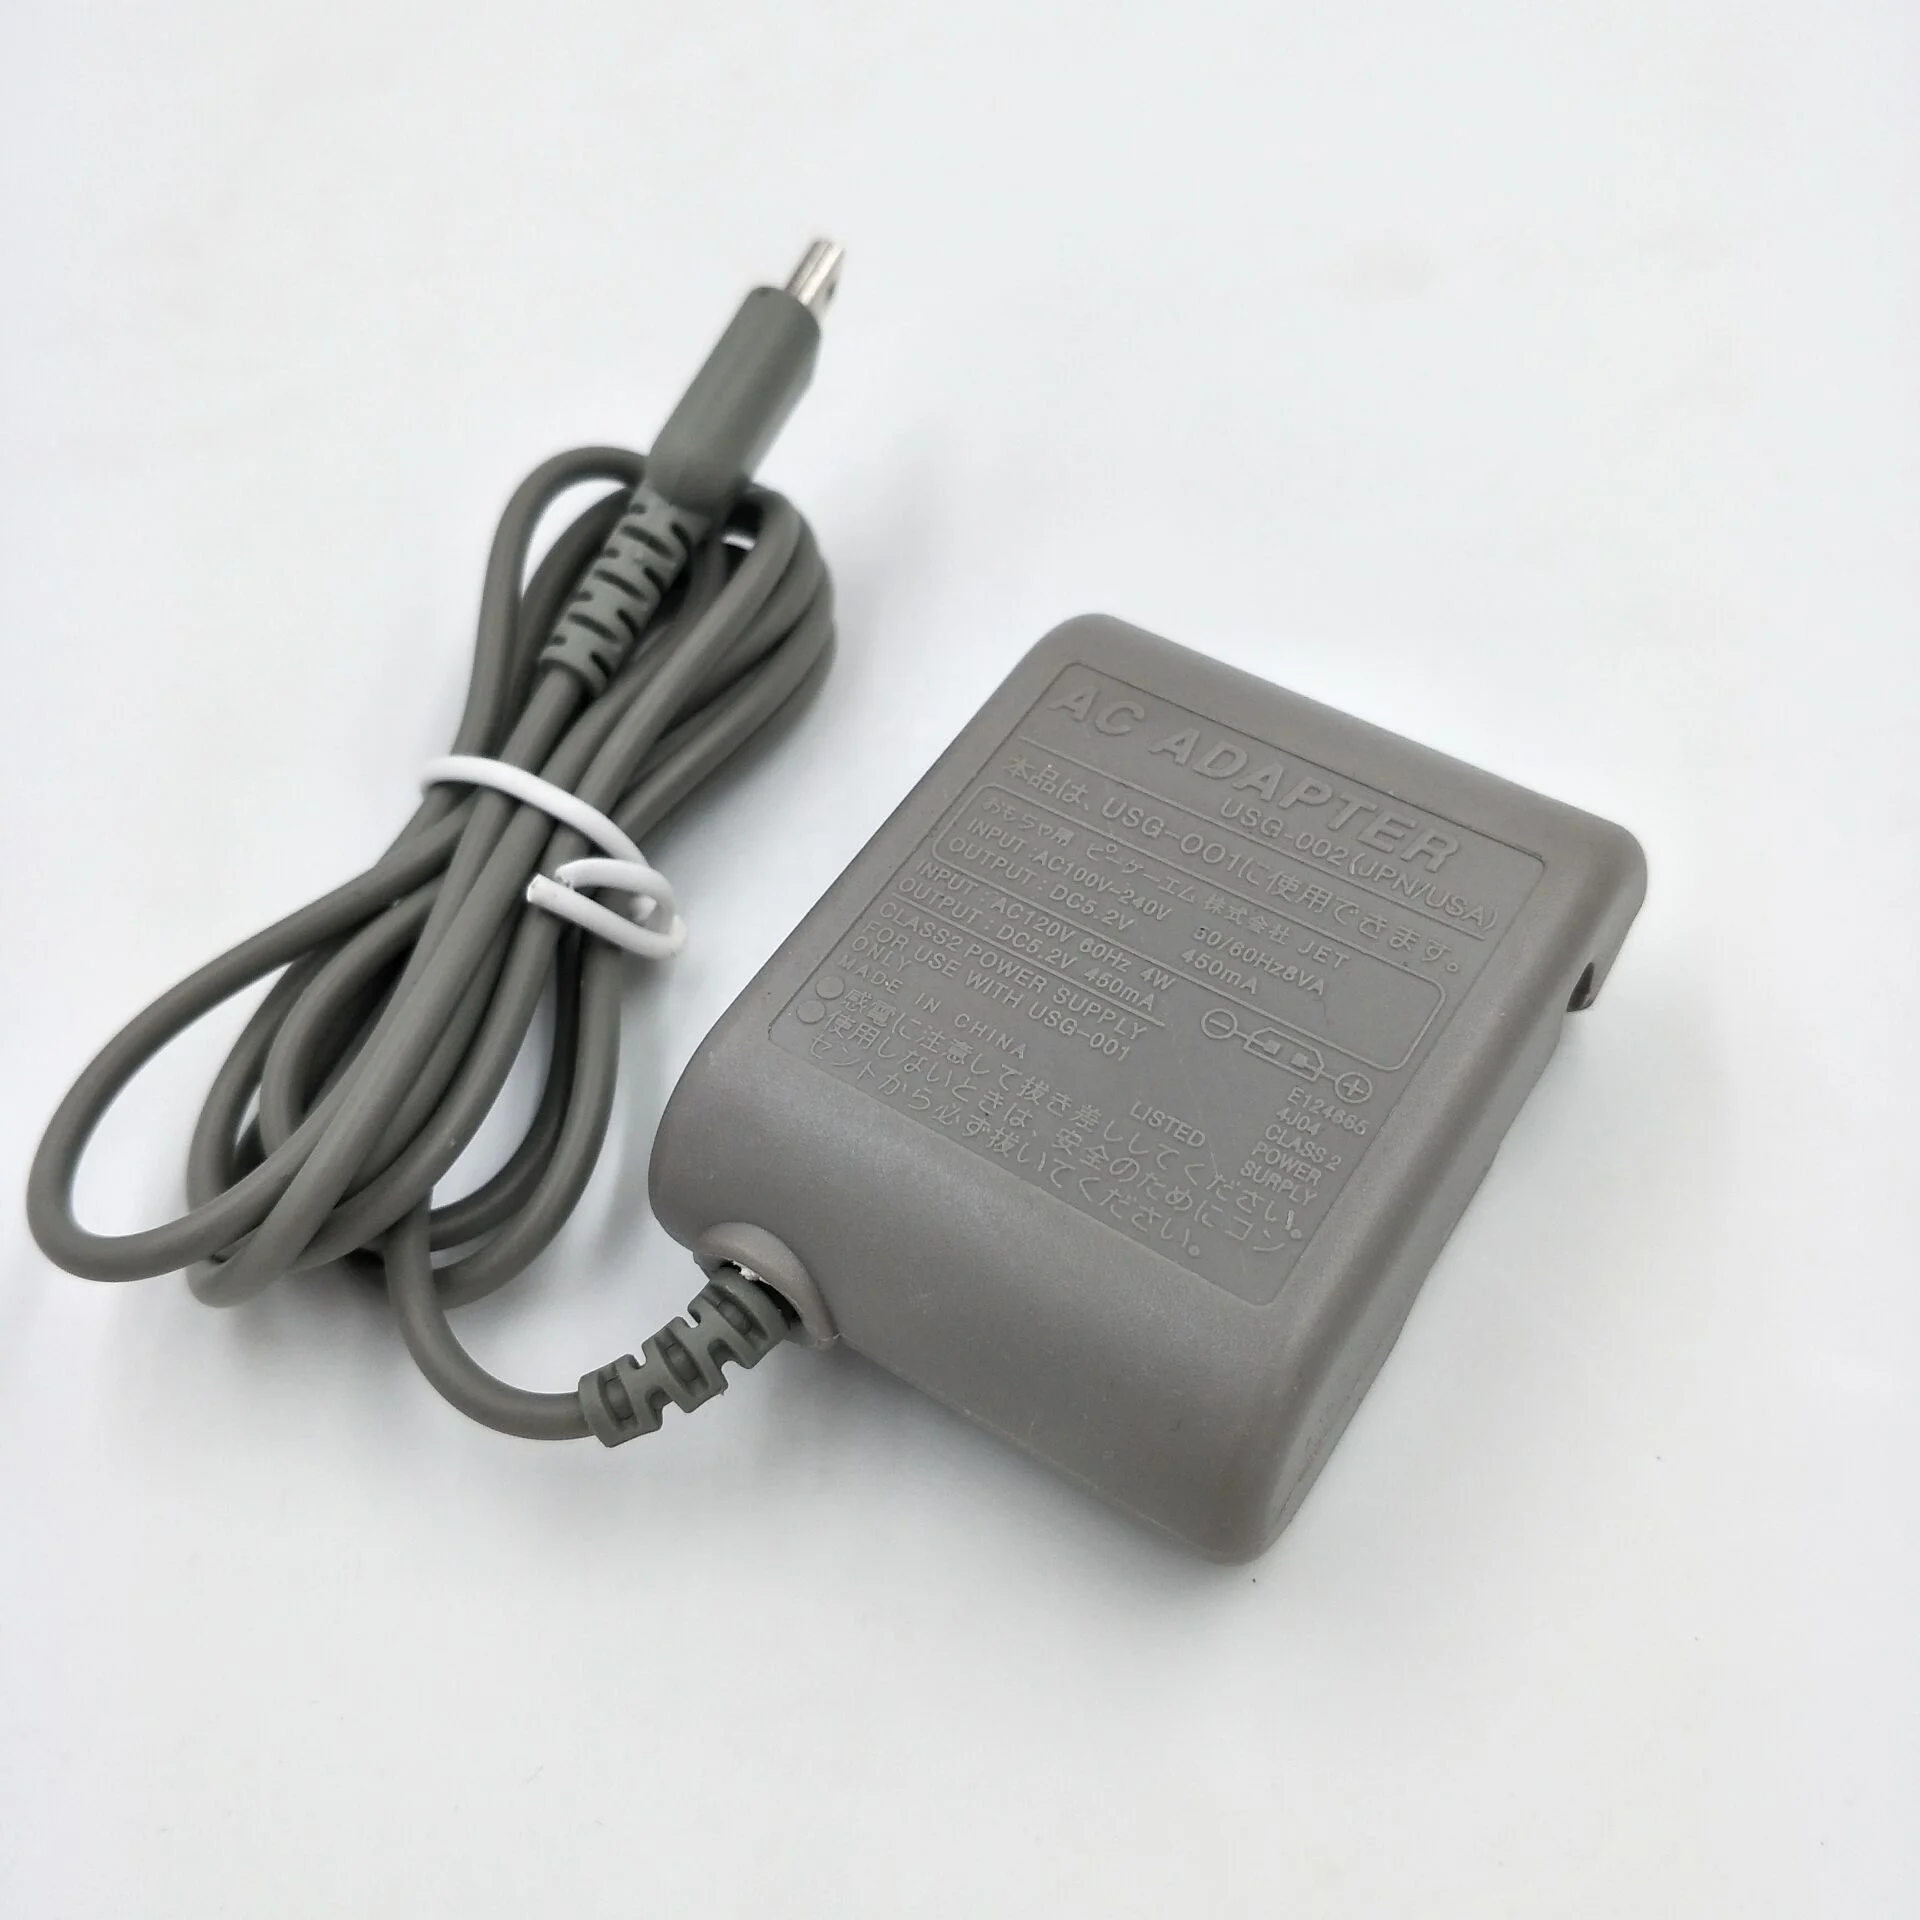 

US Plug Home Wall Travel Charger AC Power Supply Cord Adapter for Nintendo DS Lite DSL NDSL, Grey